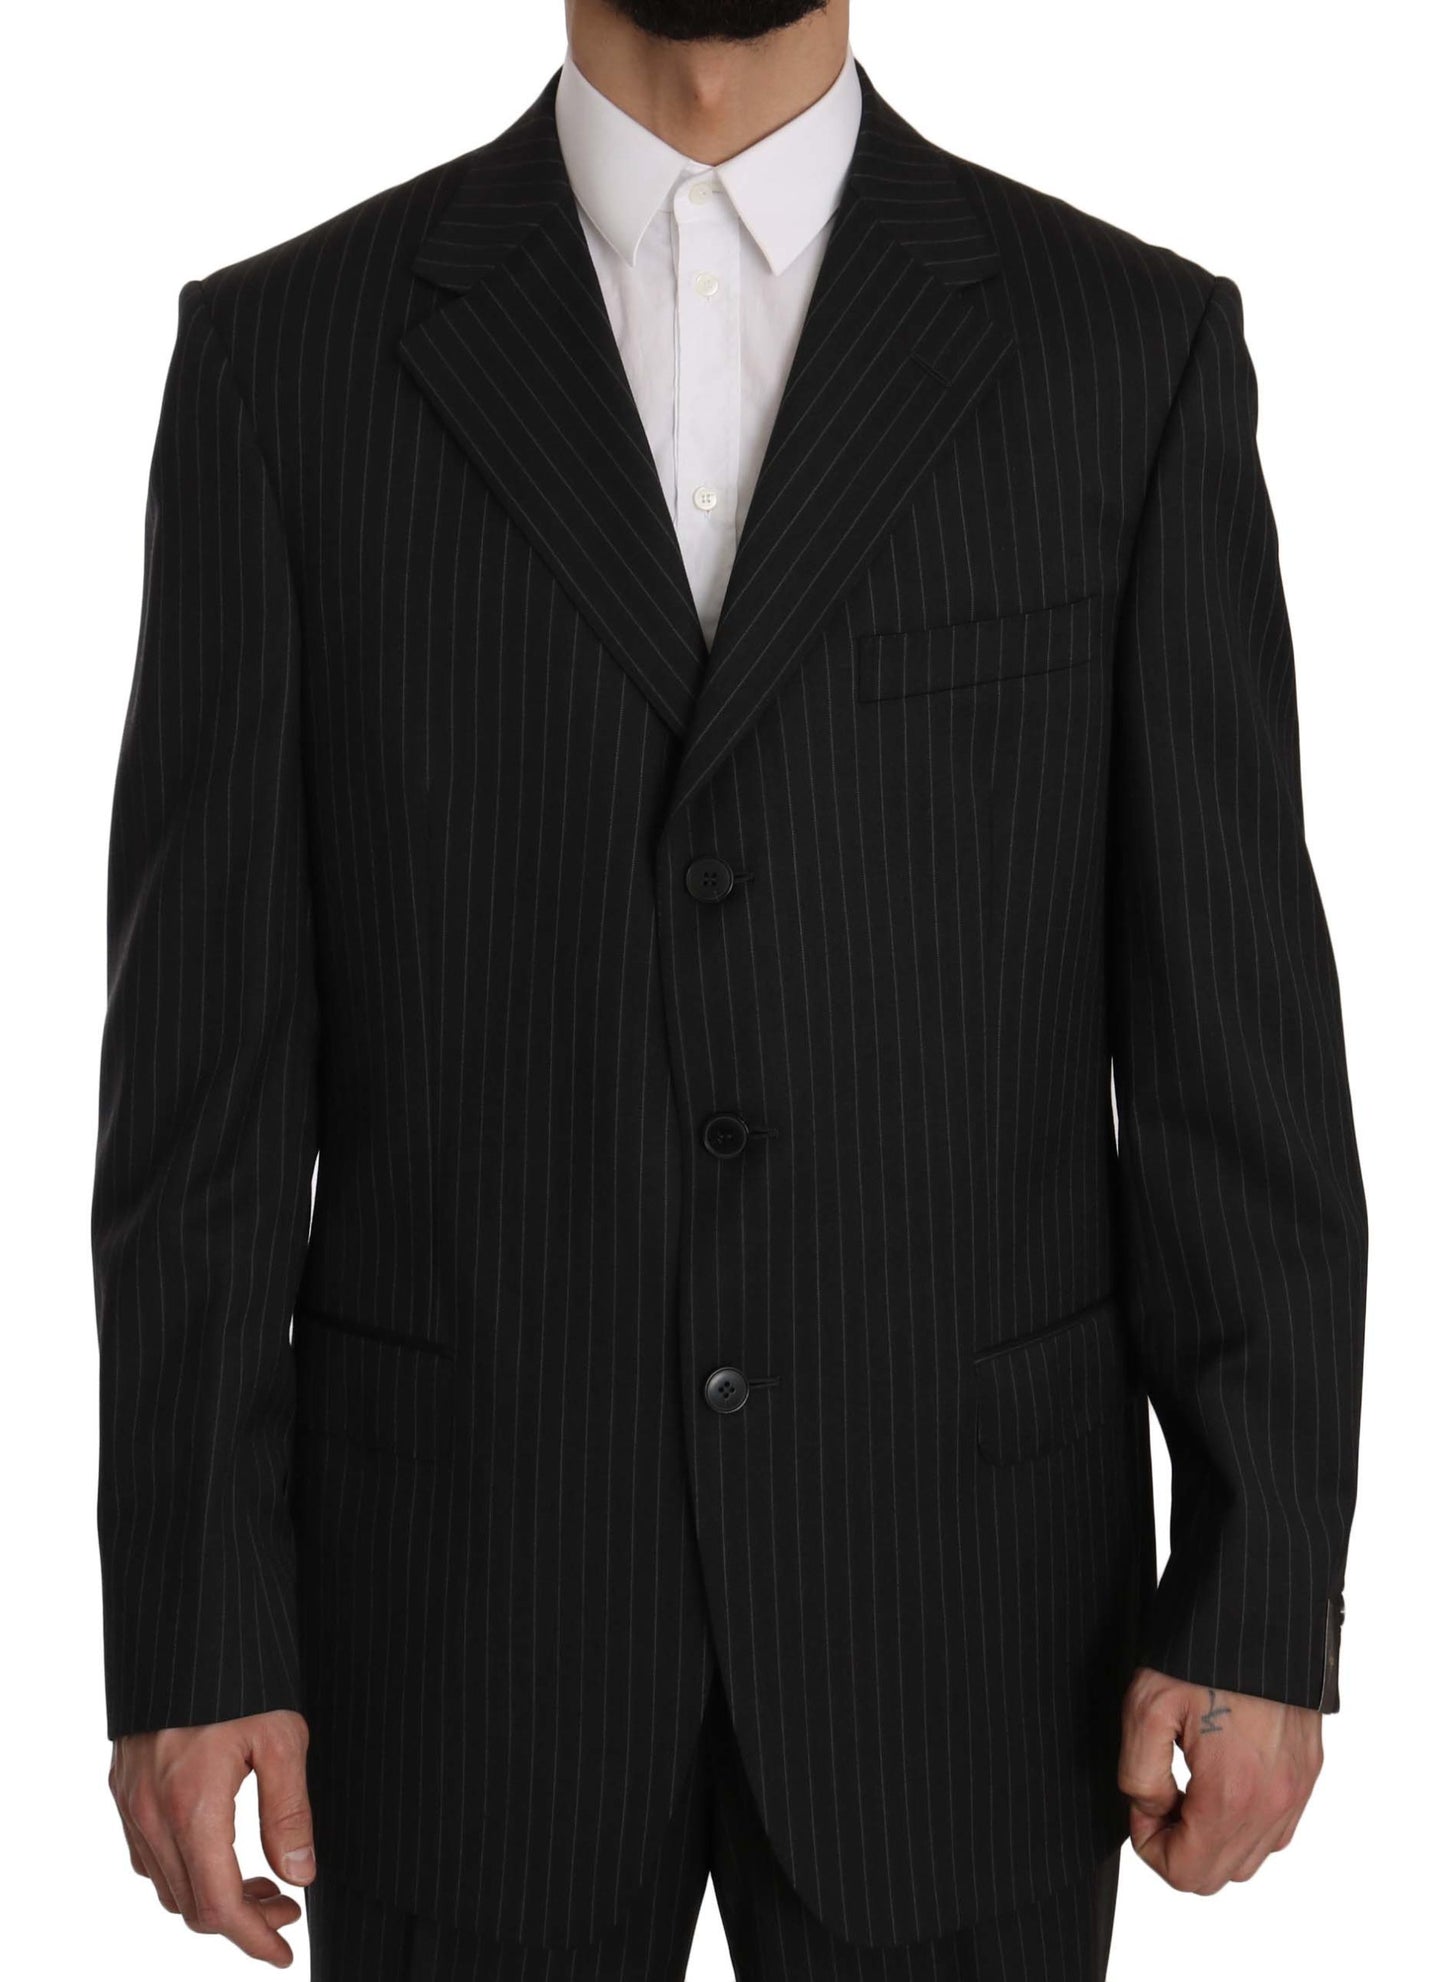 Black Striped Two Piece 3 Button 100% Wool Suit designed by Z ZEGNA available from Moon Behind The Hill's Men's Clothing range